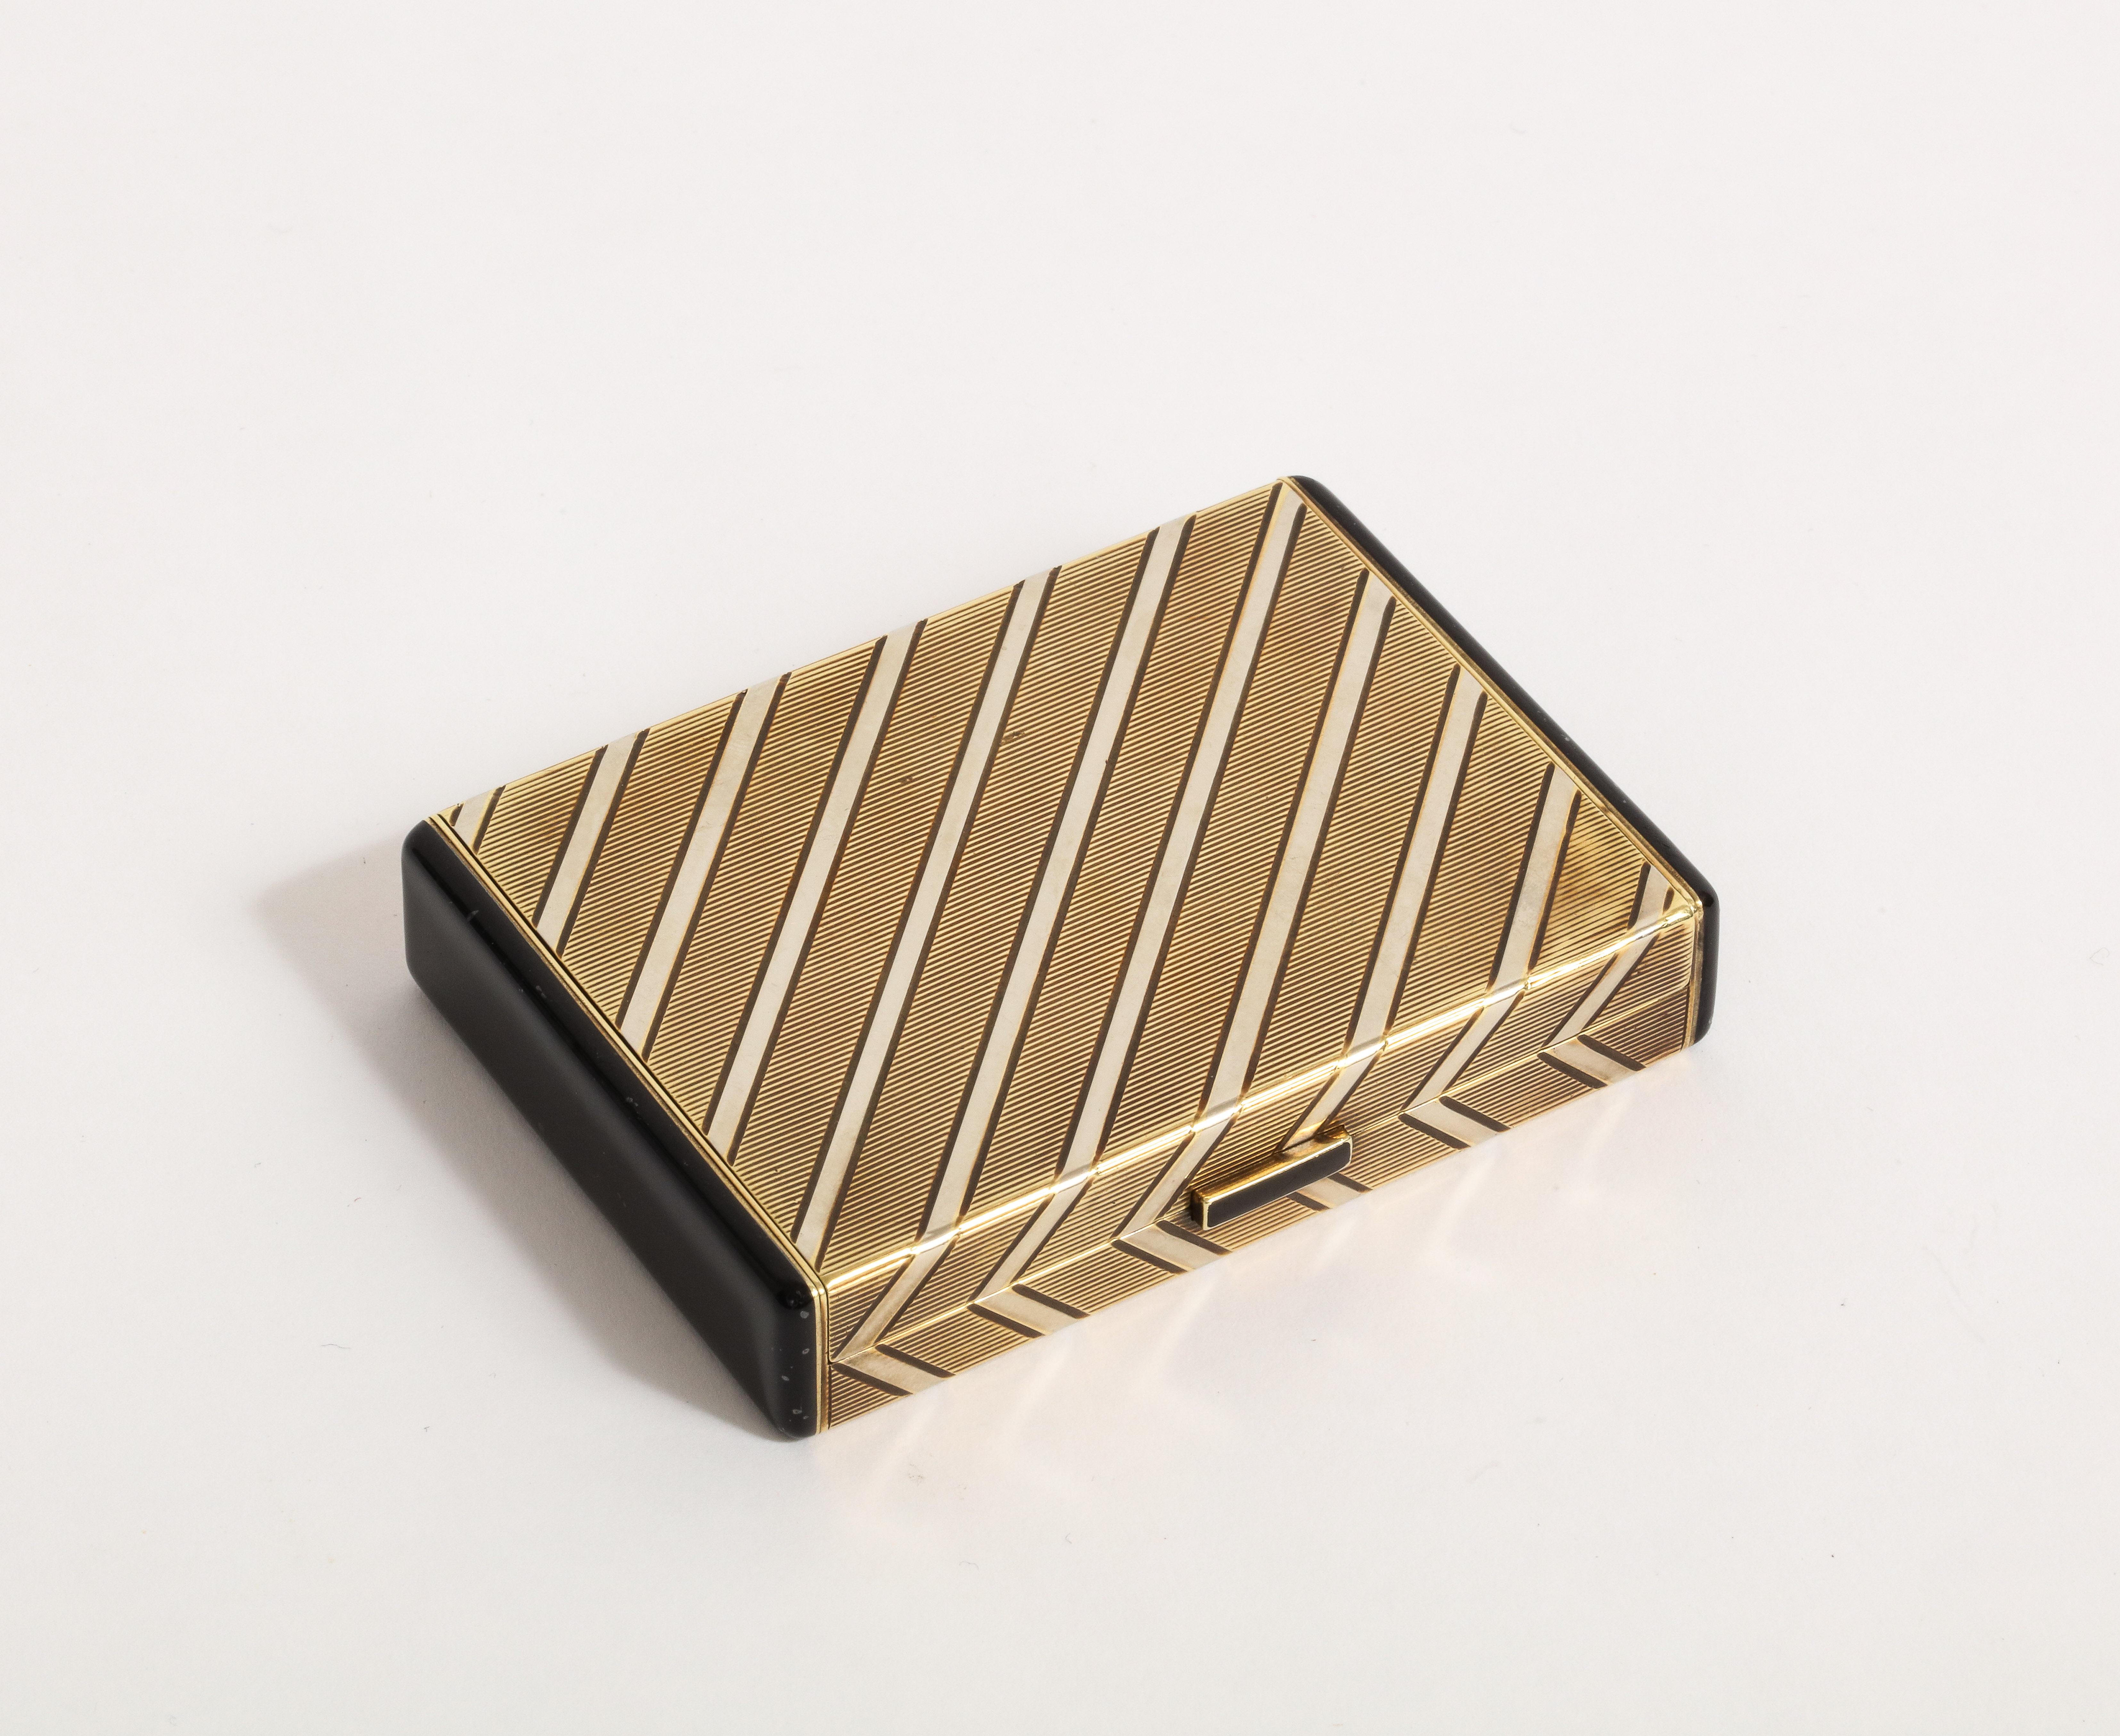 1920s Art Deco gold & enamel vanity case by Cartier 

14k Gold. signed Cartier

Weight: 112.7 grams

Dimensions: Width 3 in, Height 0.44 in approximately.

